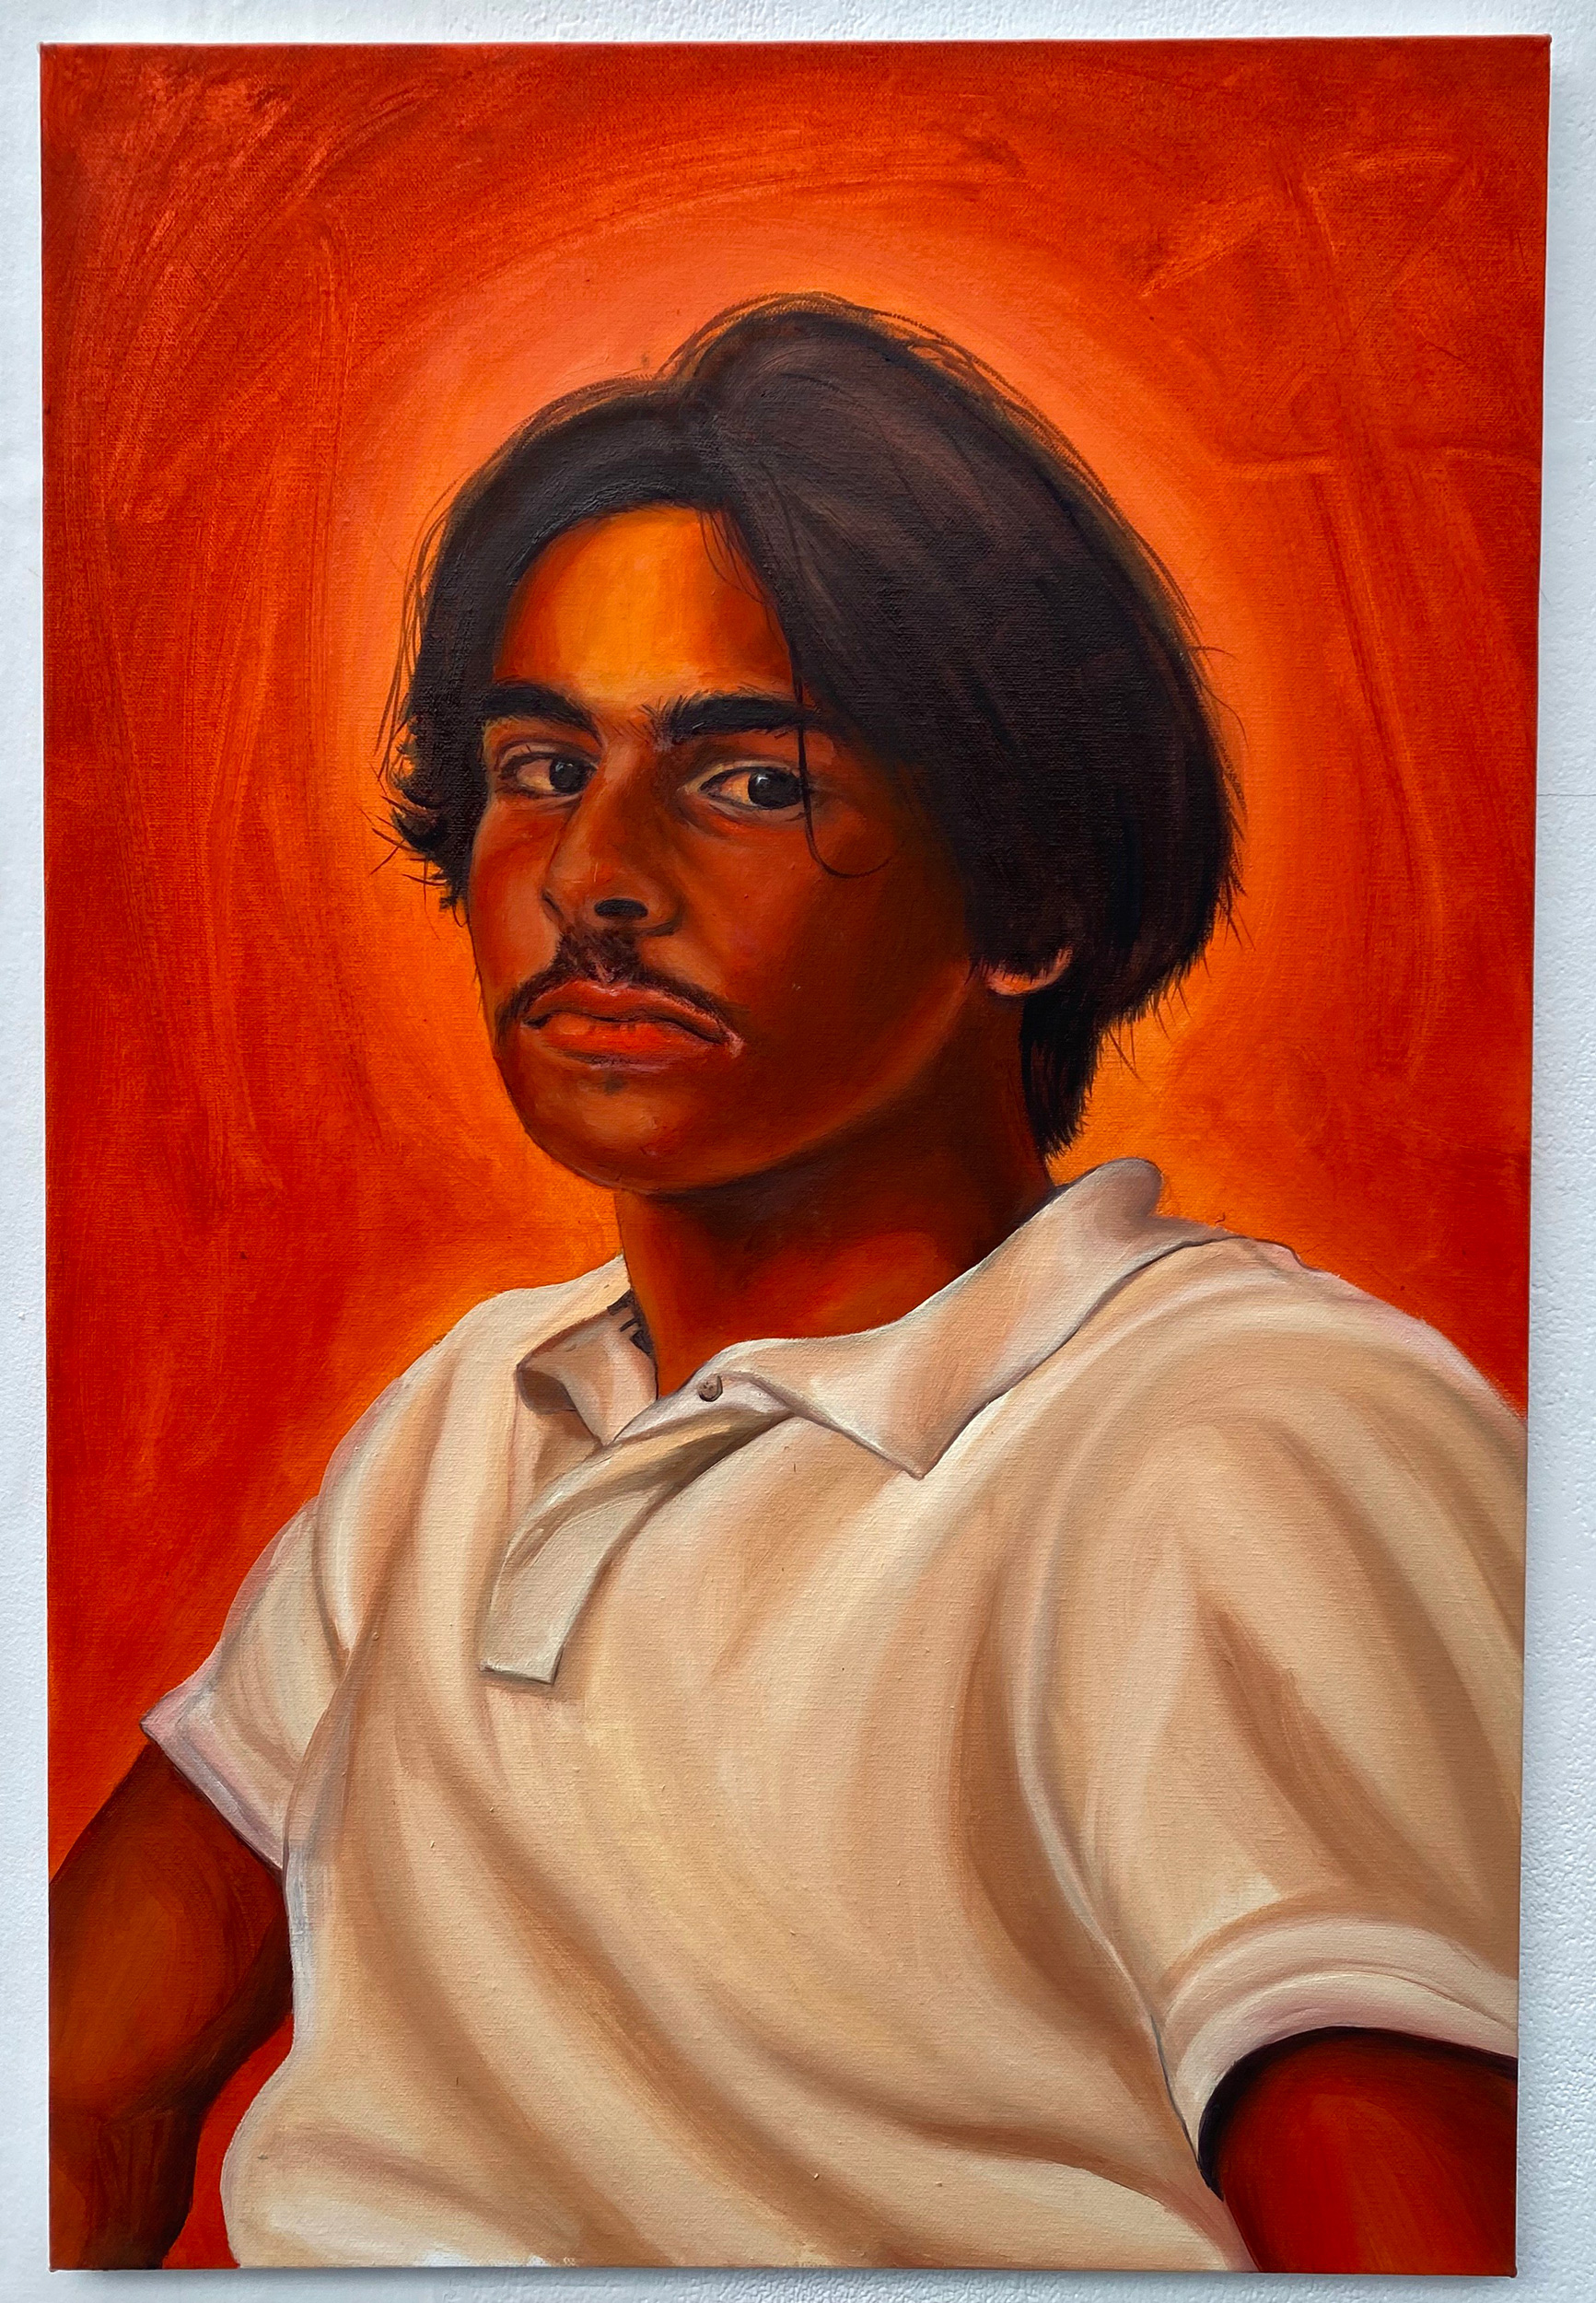 Oil painting by Yasmin Shah depicting her brother, using all orange tones.